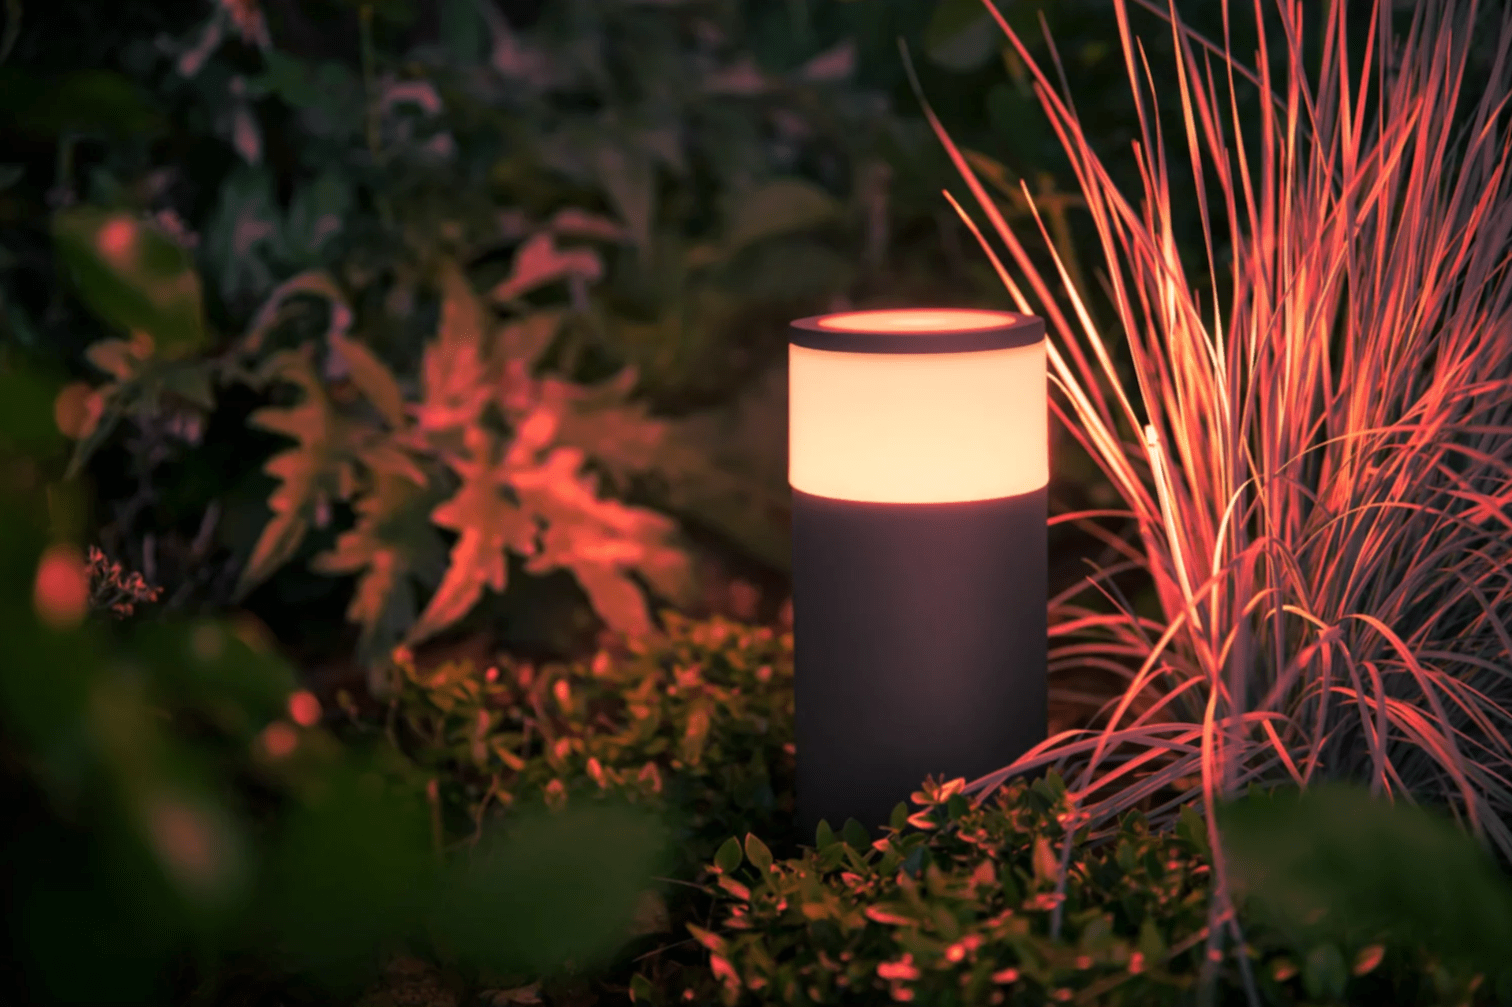 close up of small cylindrical light feature casting red light on plants in garden